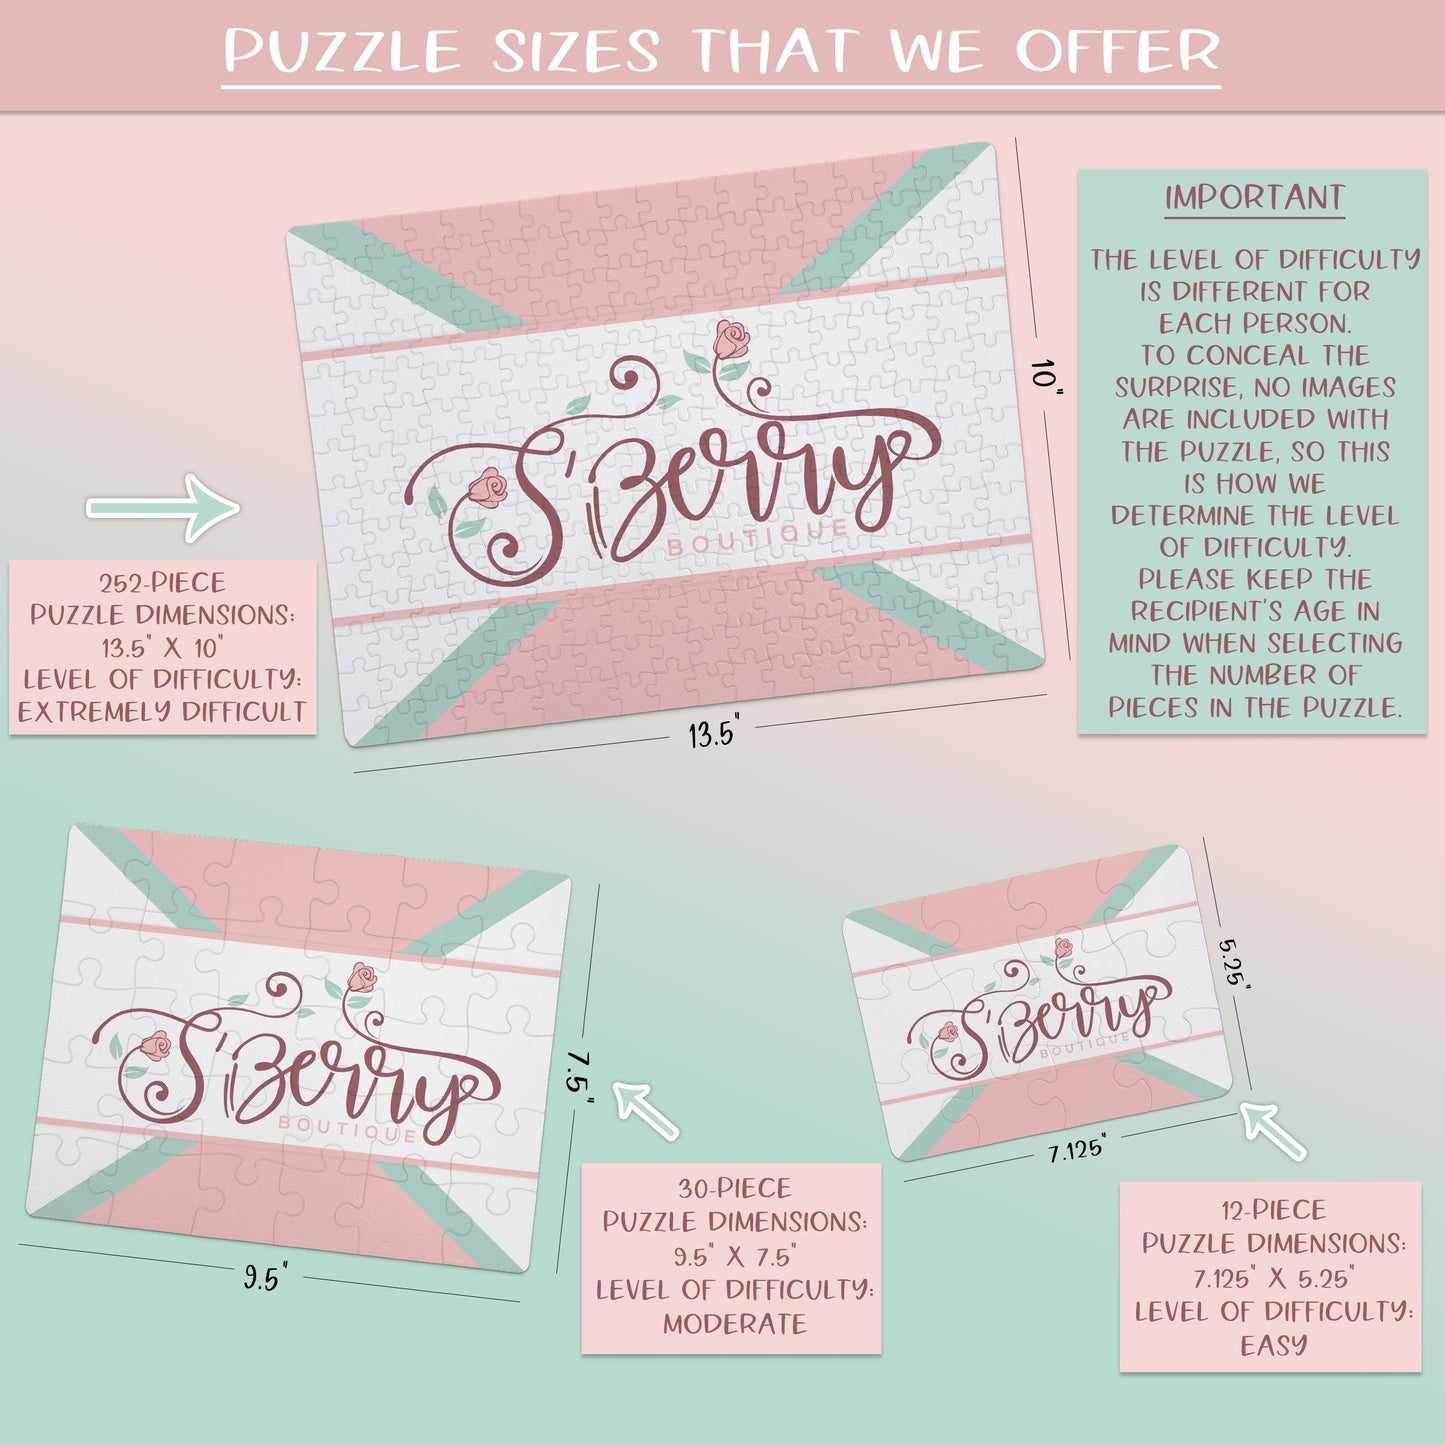 Create Your Own Puzzle - Striped Design - CYOP0180 | S'Berry Boutique